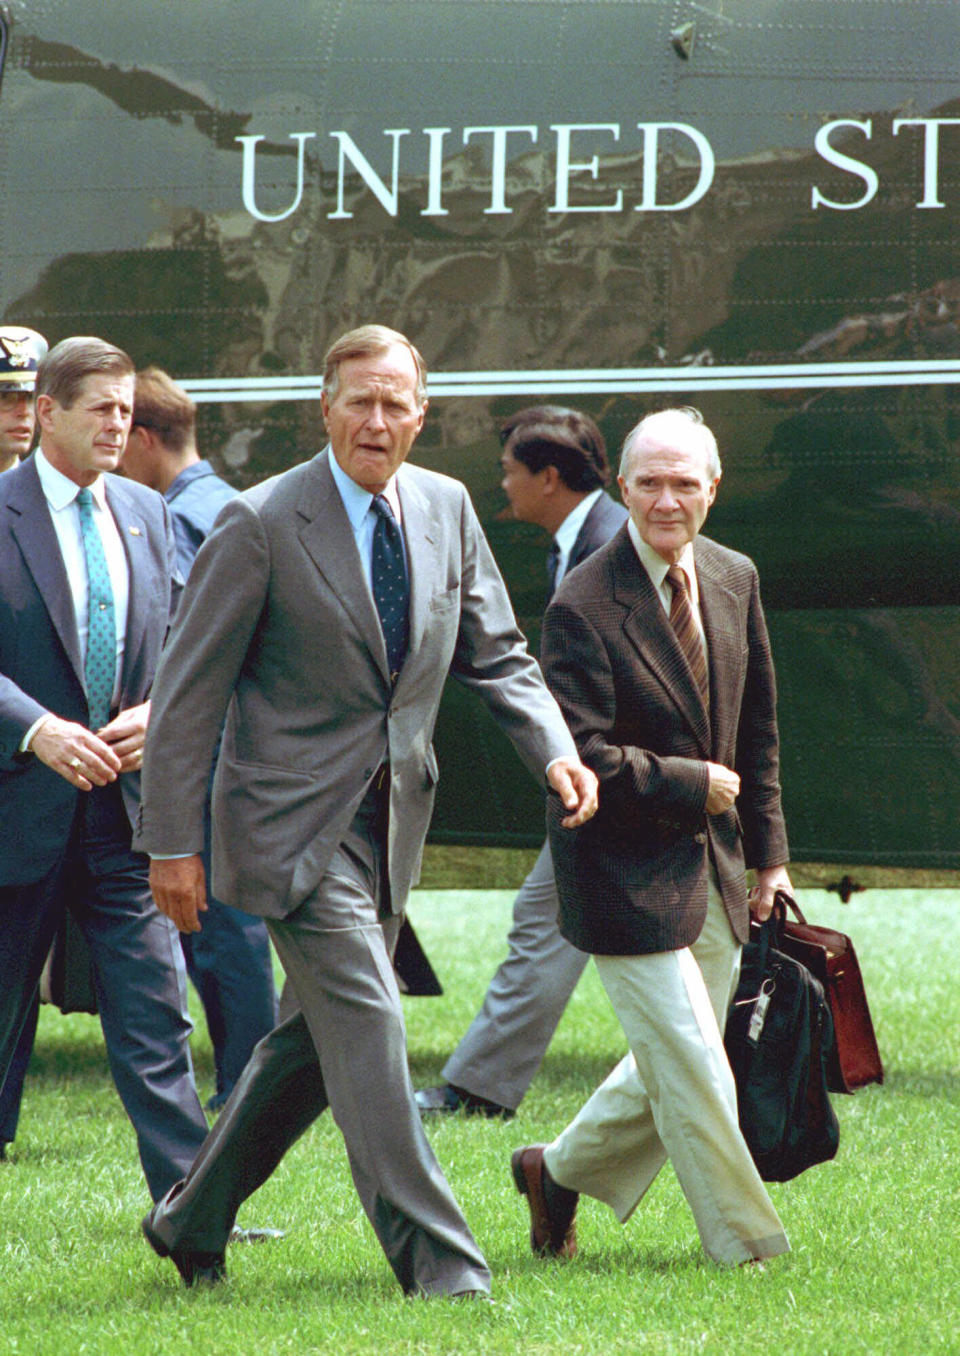 FILE - In this August 19, 1991 file photo, President George Bush, accompanied by National Security Adviser Brent Scowcroft, right, arrives back at the White House after he interrupteed his vacation following the overthrow of Soviet President Gorbachev. A longtime adviser to Presidents Gerald Ford and George H.W. Bush has died. Brent Scowcroft was 95. A spokesperson for the late President Bush says Scowcroft died Thursday of natural causes at his home in Falls Church, Virginia. (AP Photo/Barry Thumma)